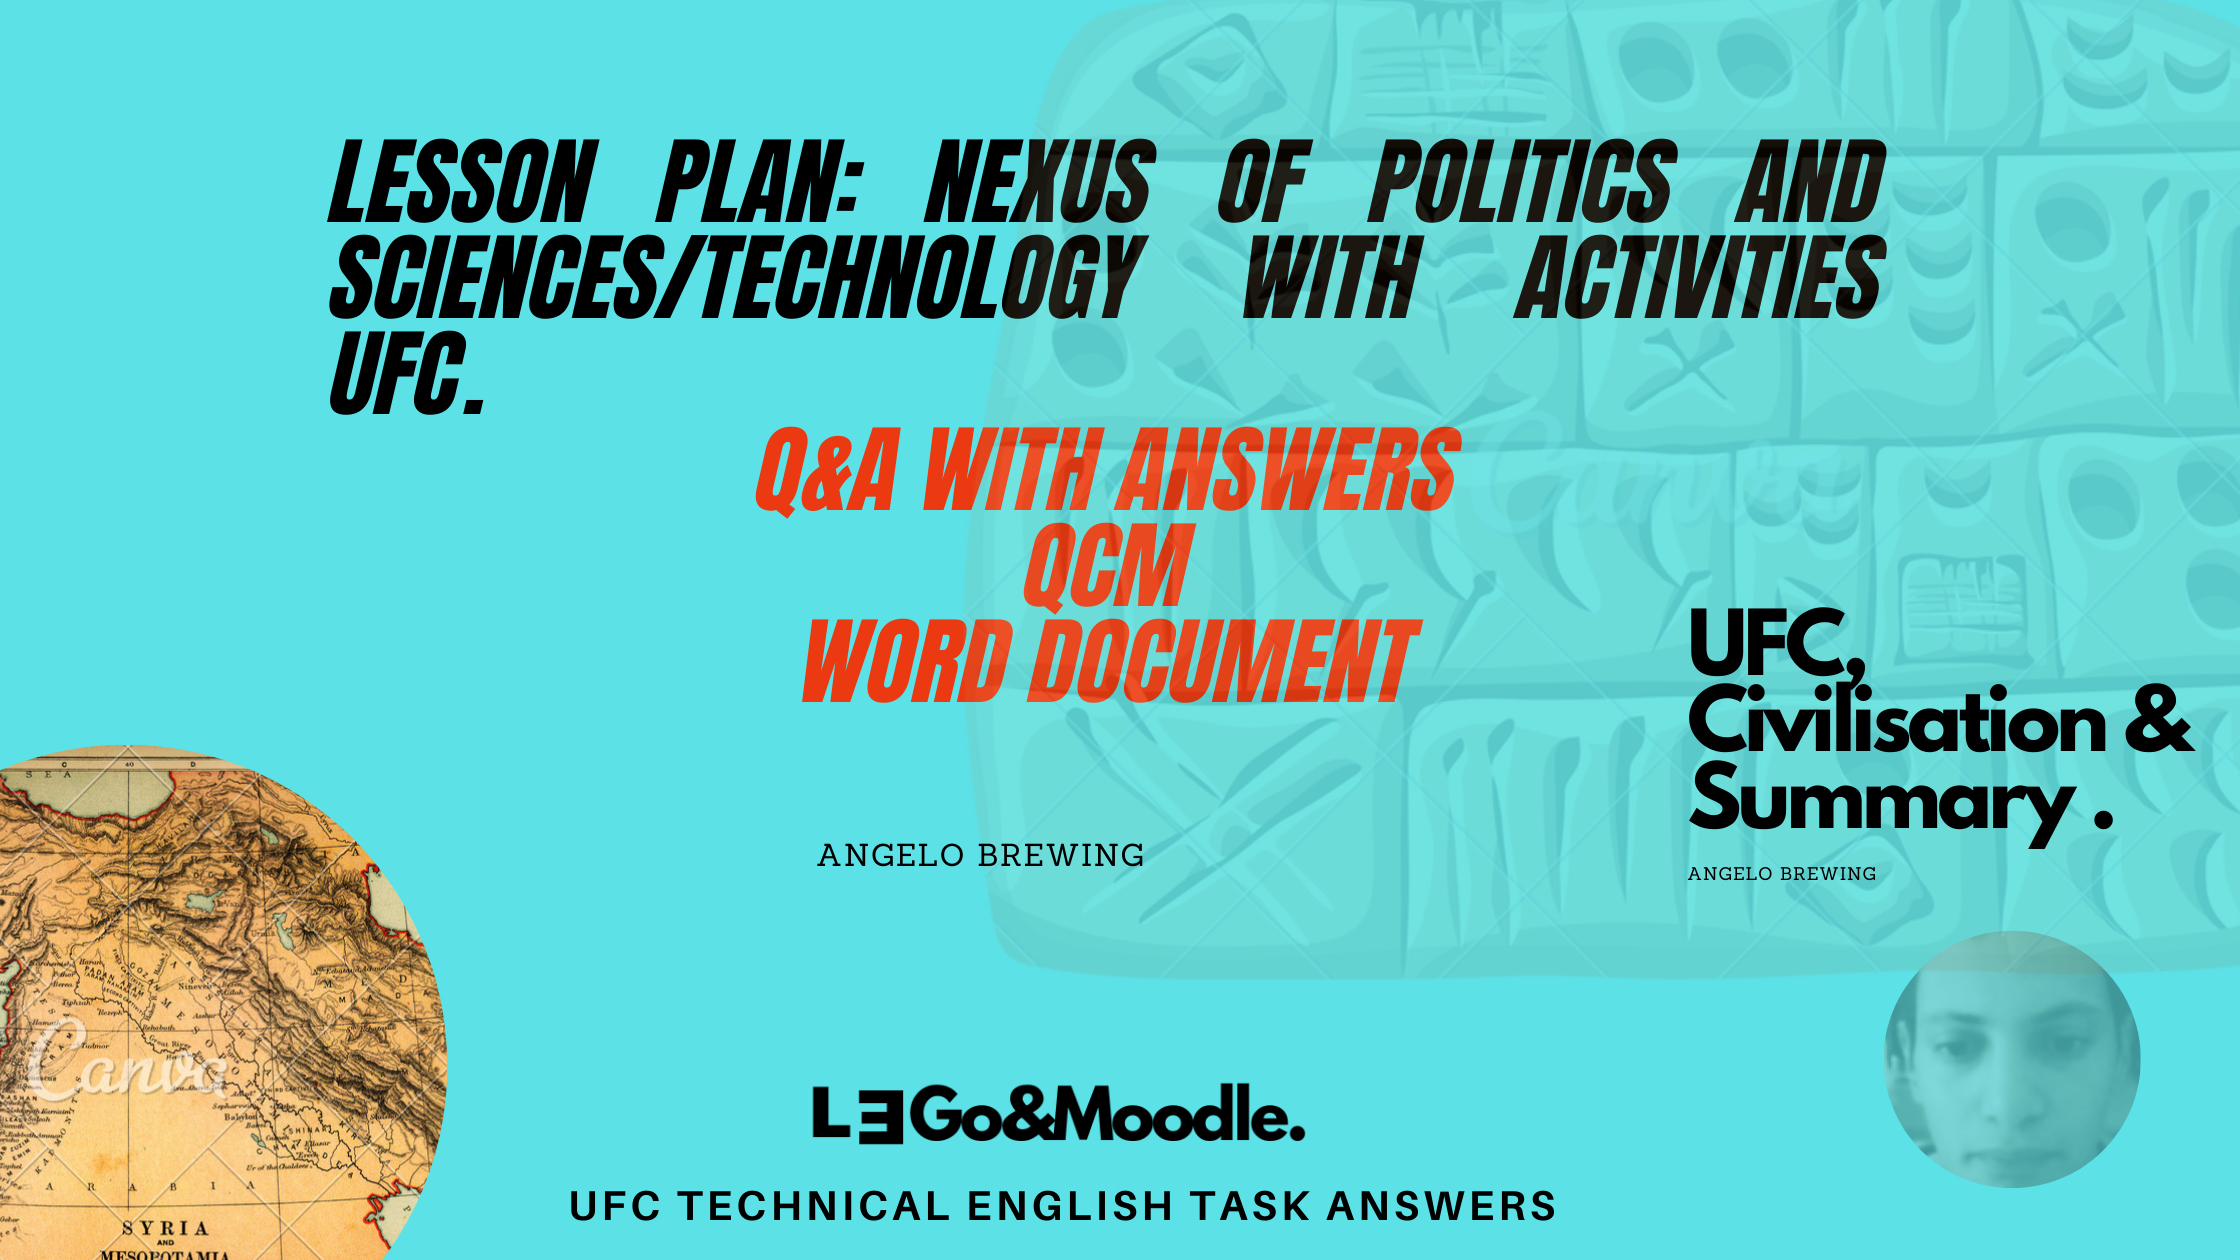 Lesson Plan: Nexus of Politics and Sciences/Technology with activities UFC.